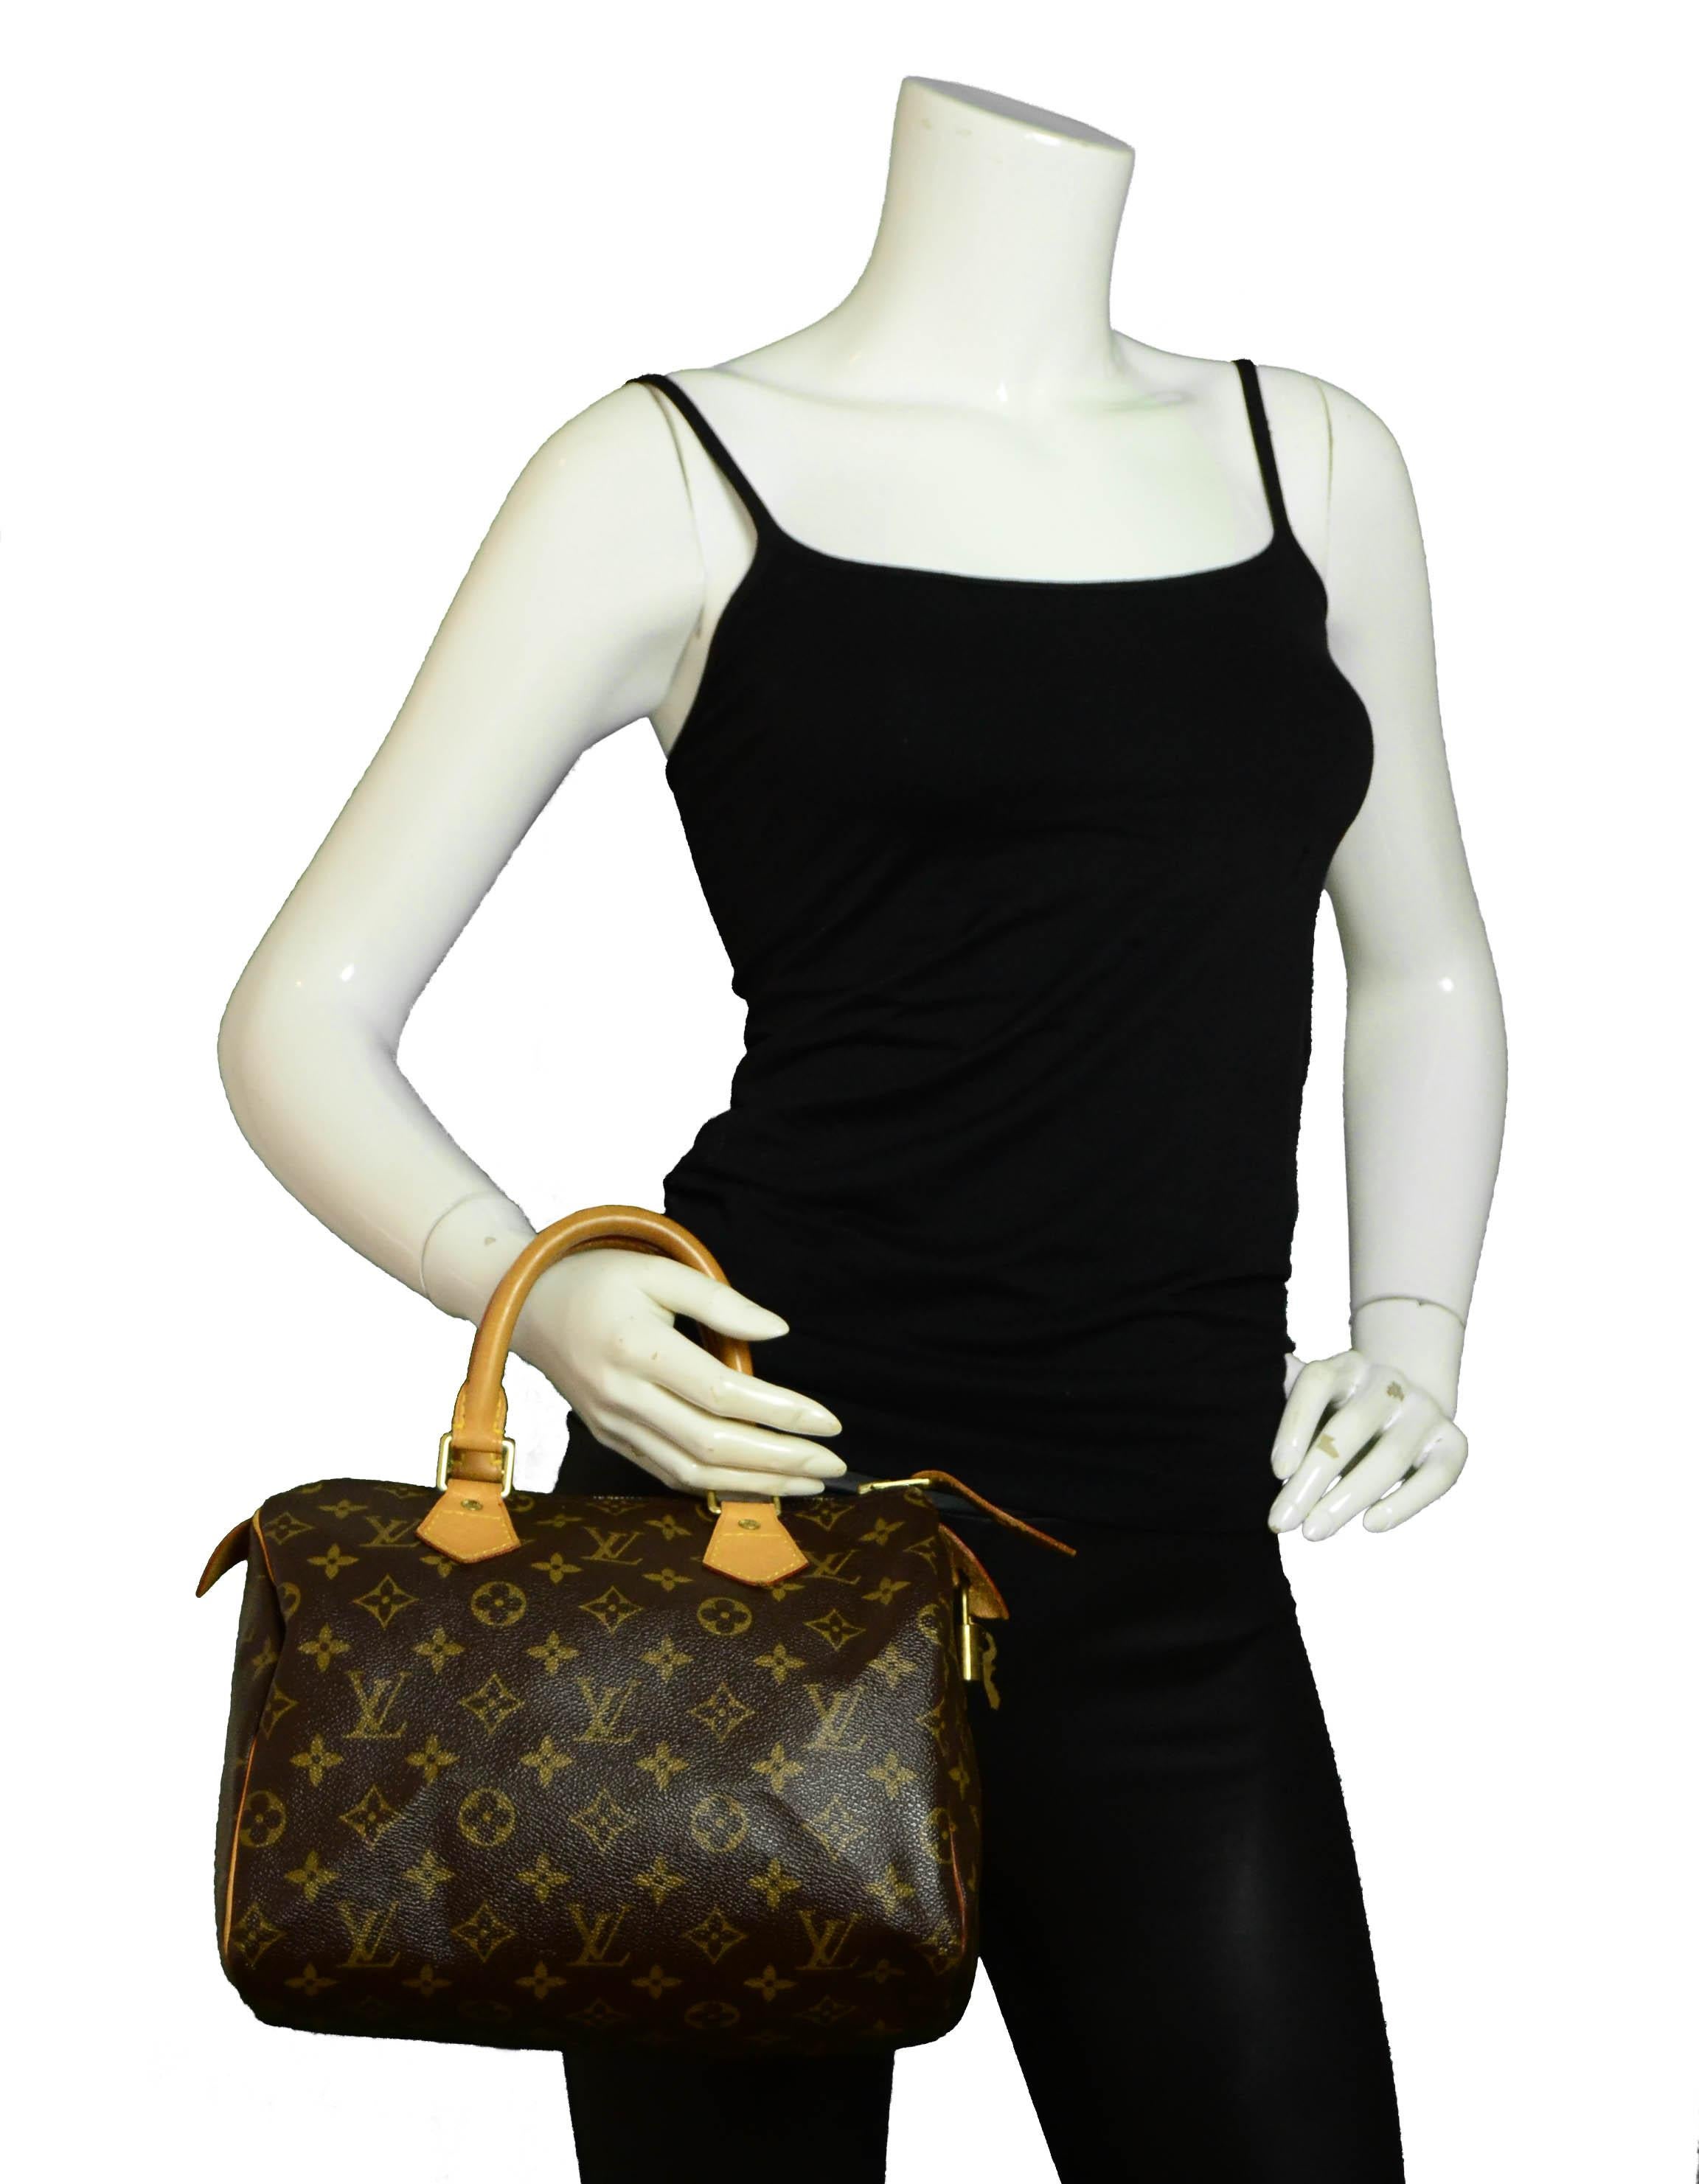 Louis Vuitton Coated Canvas Monogram Speedy 25 Bag

Made In: U.S.A.
Year of Production: 2005
Color: Brown
Hardware: Goldtone hardware
Materials: Coated canvas, vachetta leather trim
Lining: Brown textile lining
Closure/Opening: Top zip
Exterior